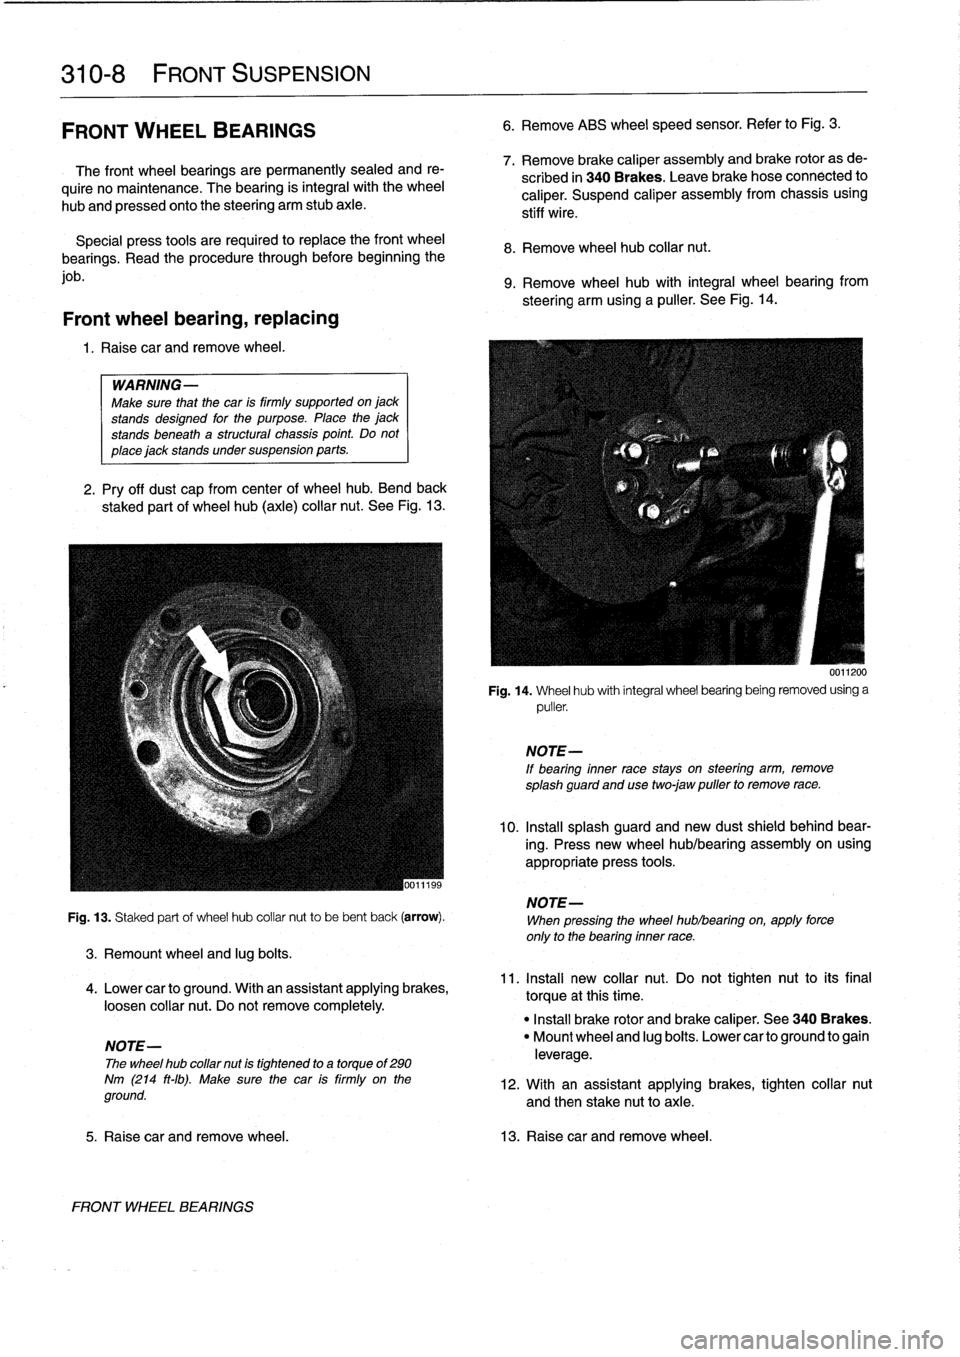 BMW 318i 1998 E36 Owners Guide 
310-
8

	

FRONT
SUSPENSION

FRONT
WHEEL
BEARINGS

The
front
wheel
bearings
are
permanently
sealed
and
re-

quire
no
maintenance
.
The
bearing
is
integral
with
the
wheel

hub
and
pressed
onto
the
ste